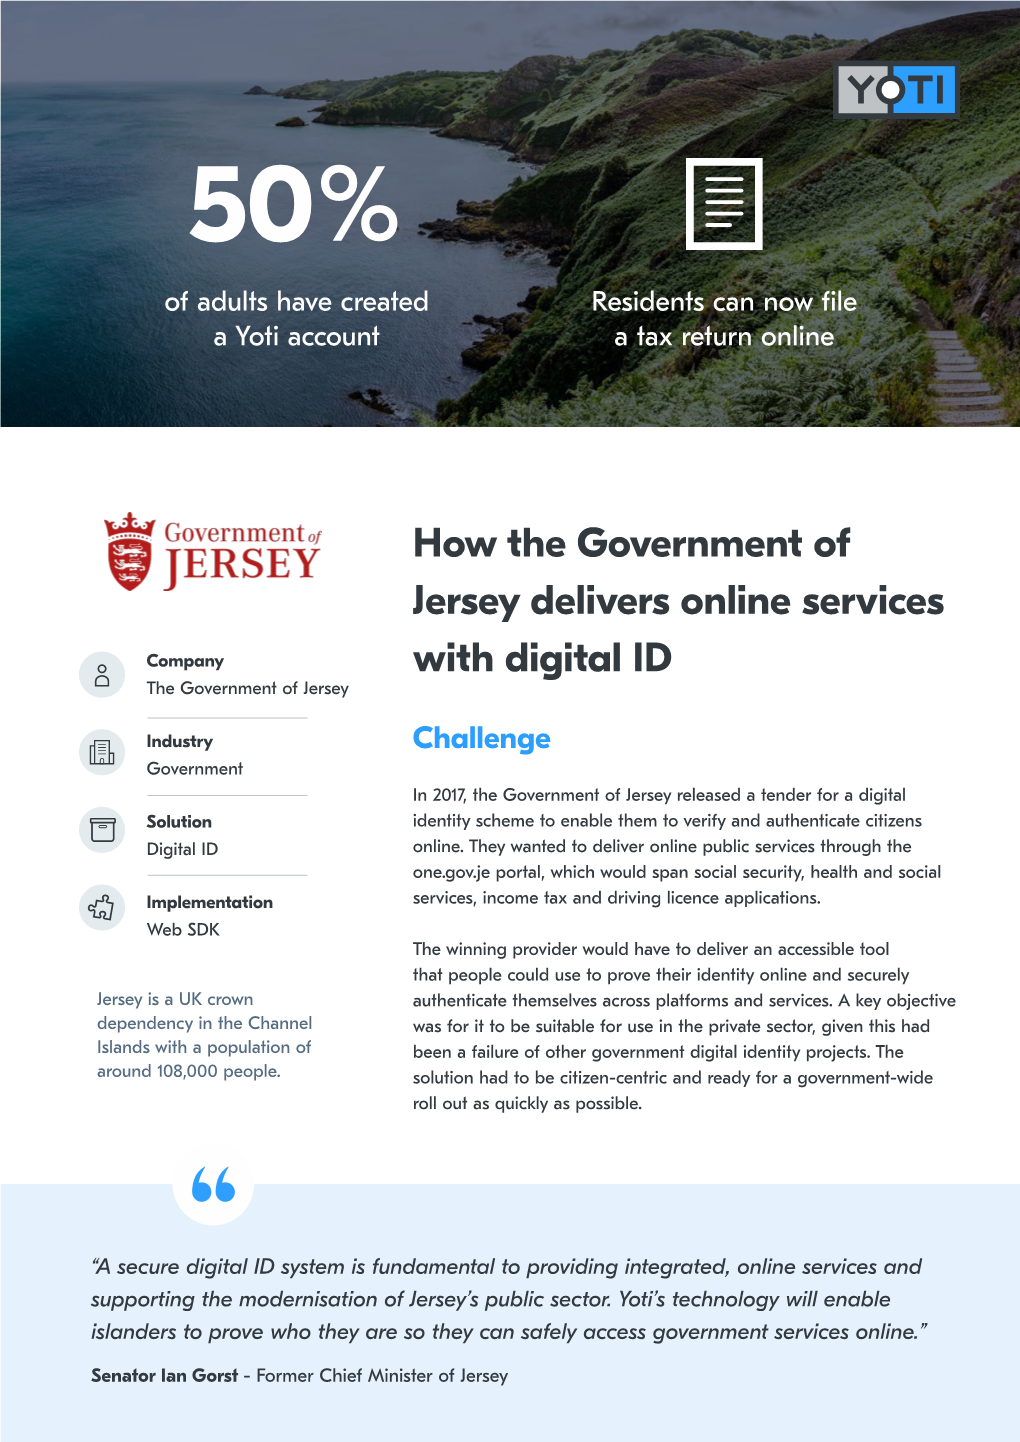 How the Government of Jersey Delivers Online Services with Digital ID